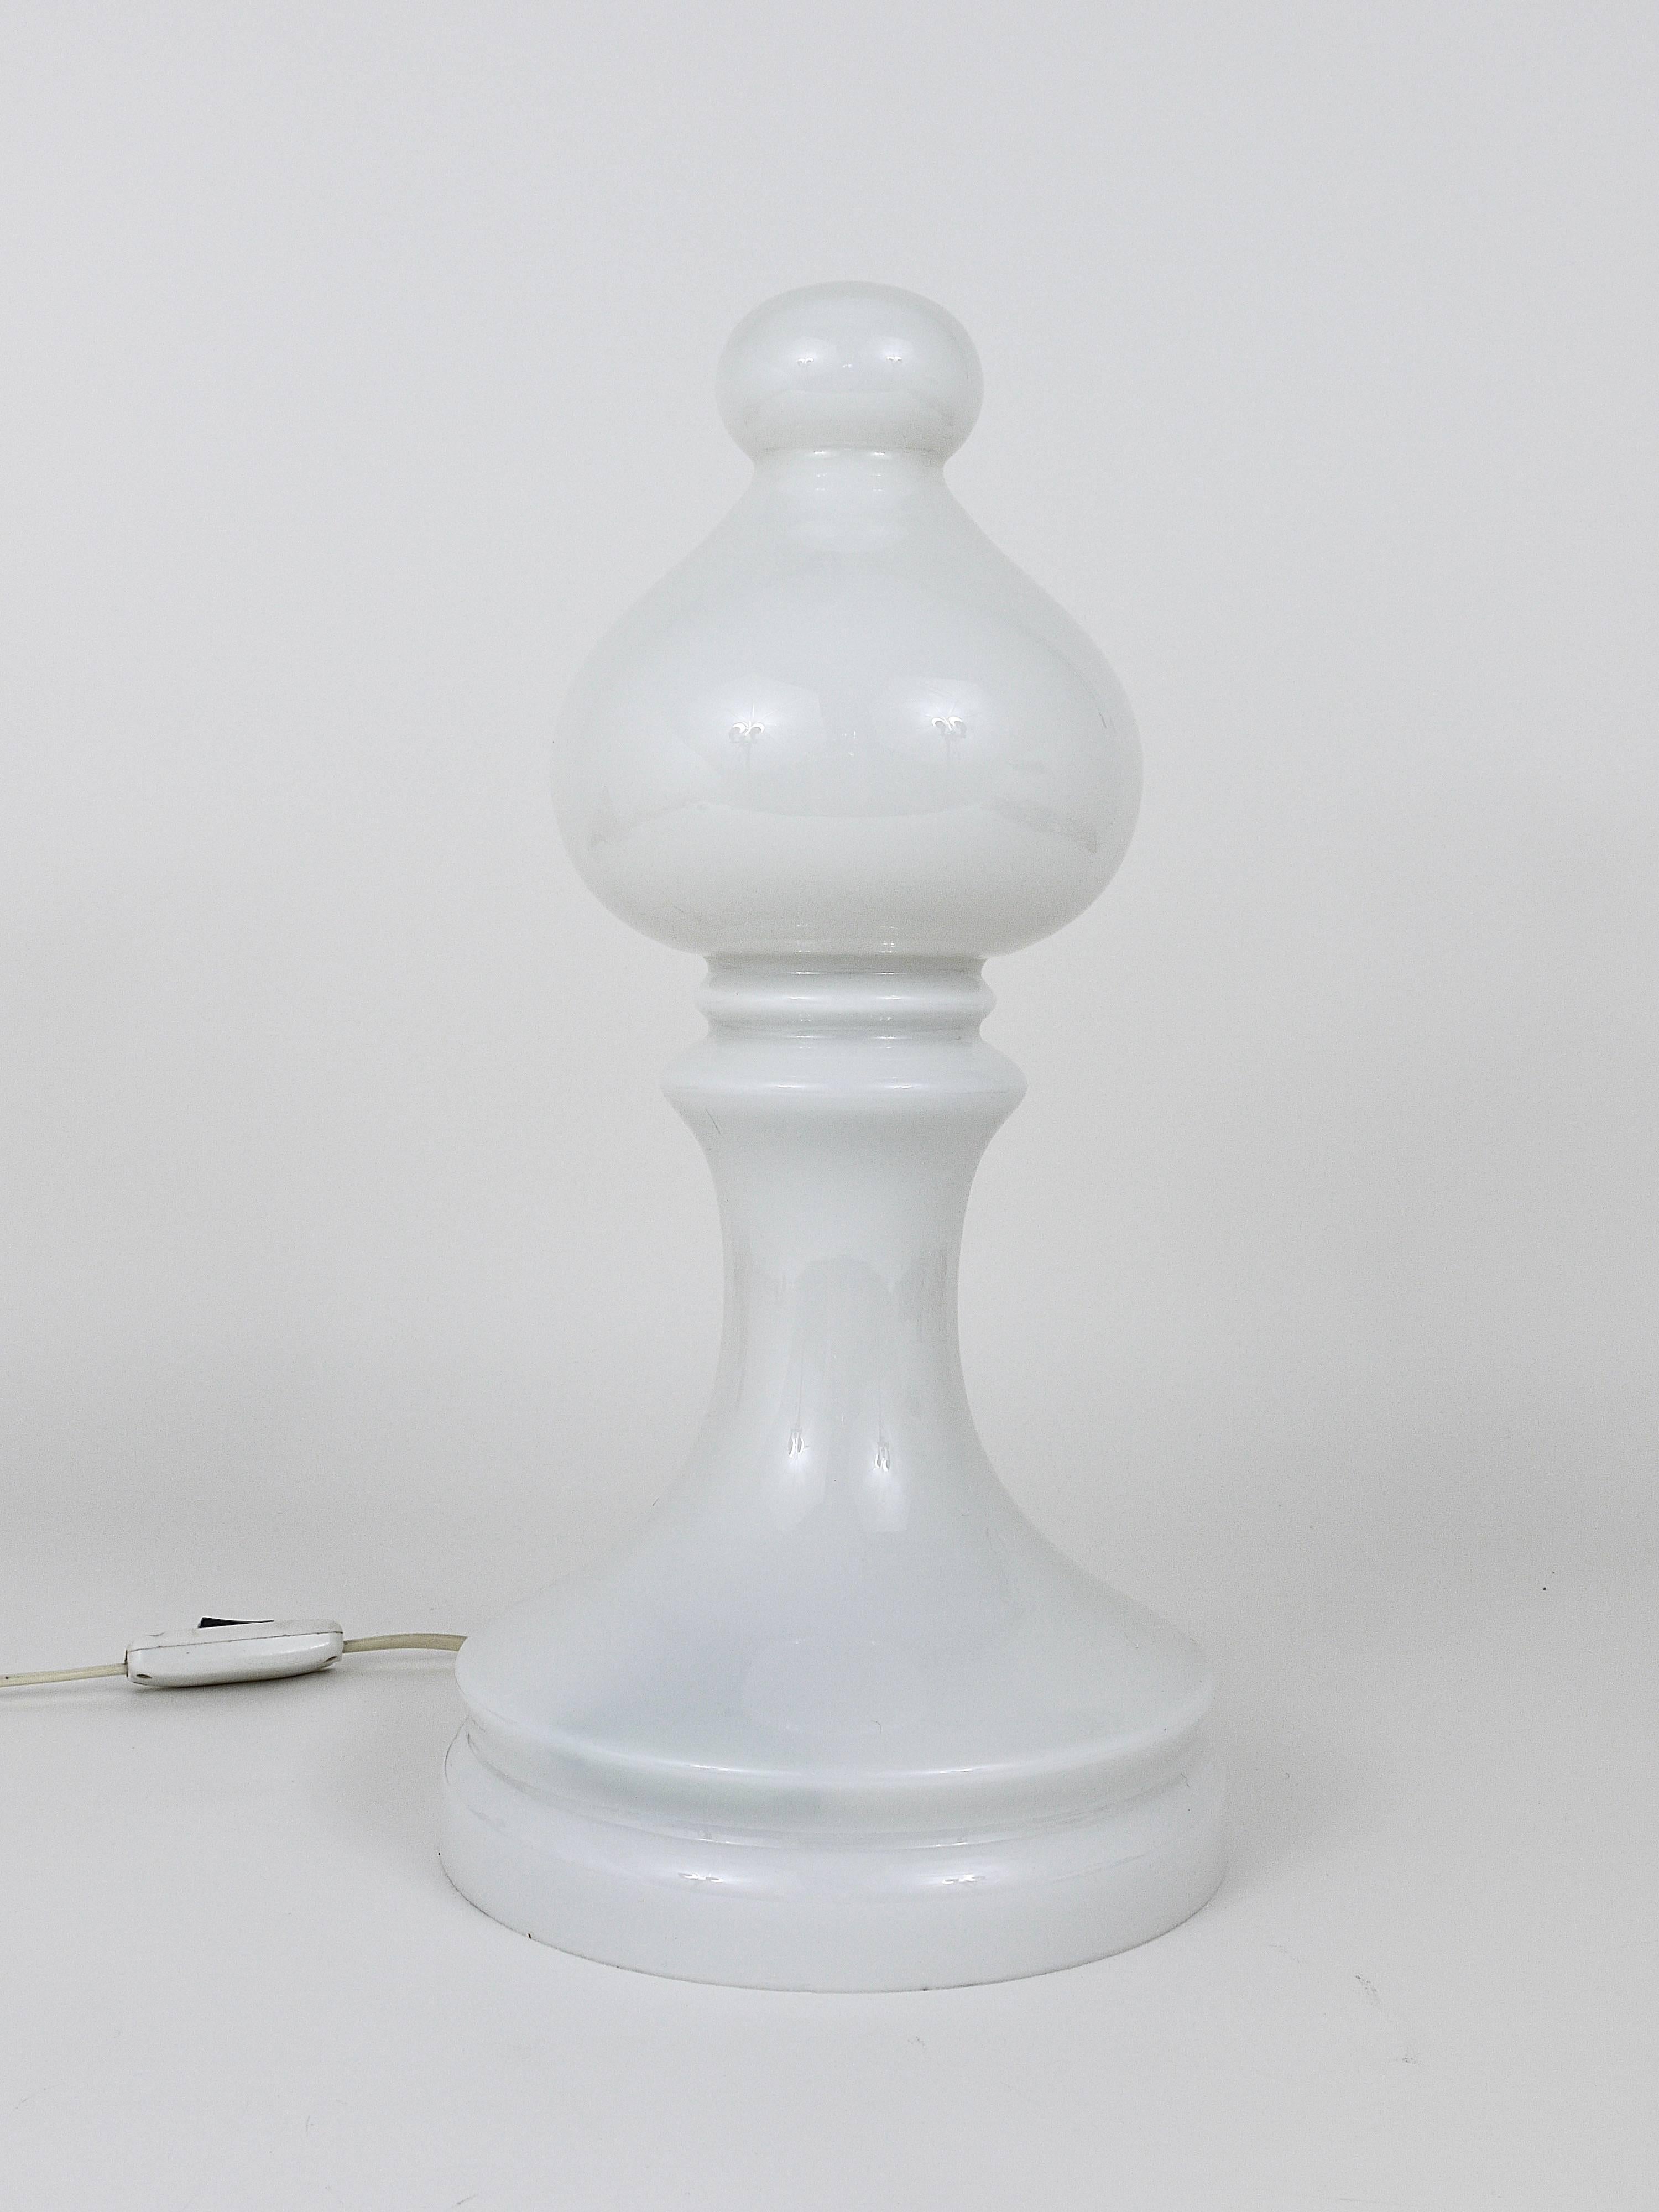 A beautiful and decorative table or side lamp in the shape of a Bishop chess piece. Designed by Ivan Jakes, made of clear and white opal glass. Executed in the 1970s in Czechoslovakia. In very good condition.